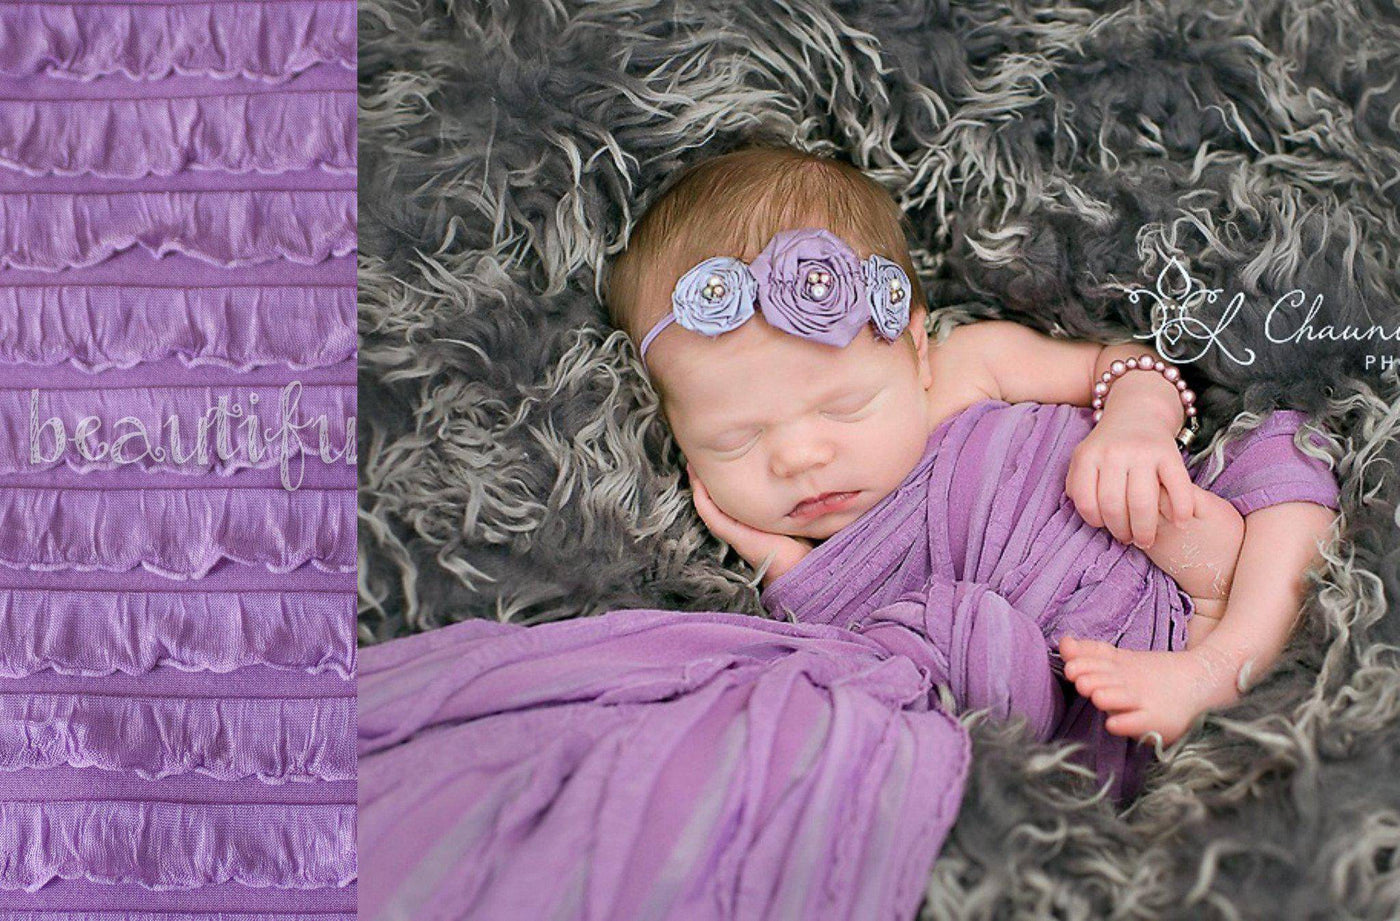 Ruffle Stretch Knit Wrap in Lavender - Beautiful Photo Props